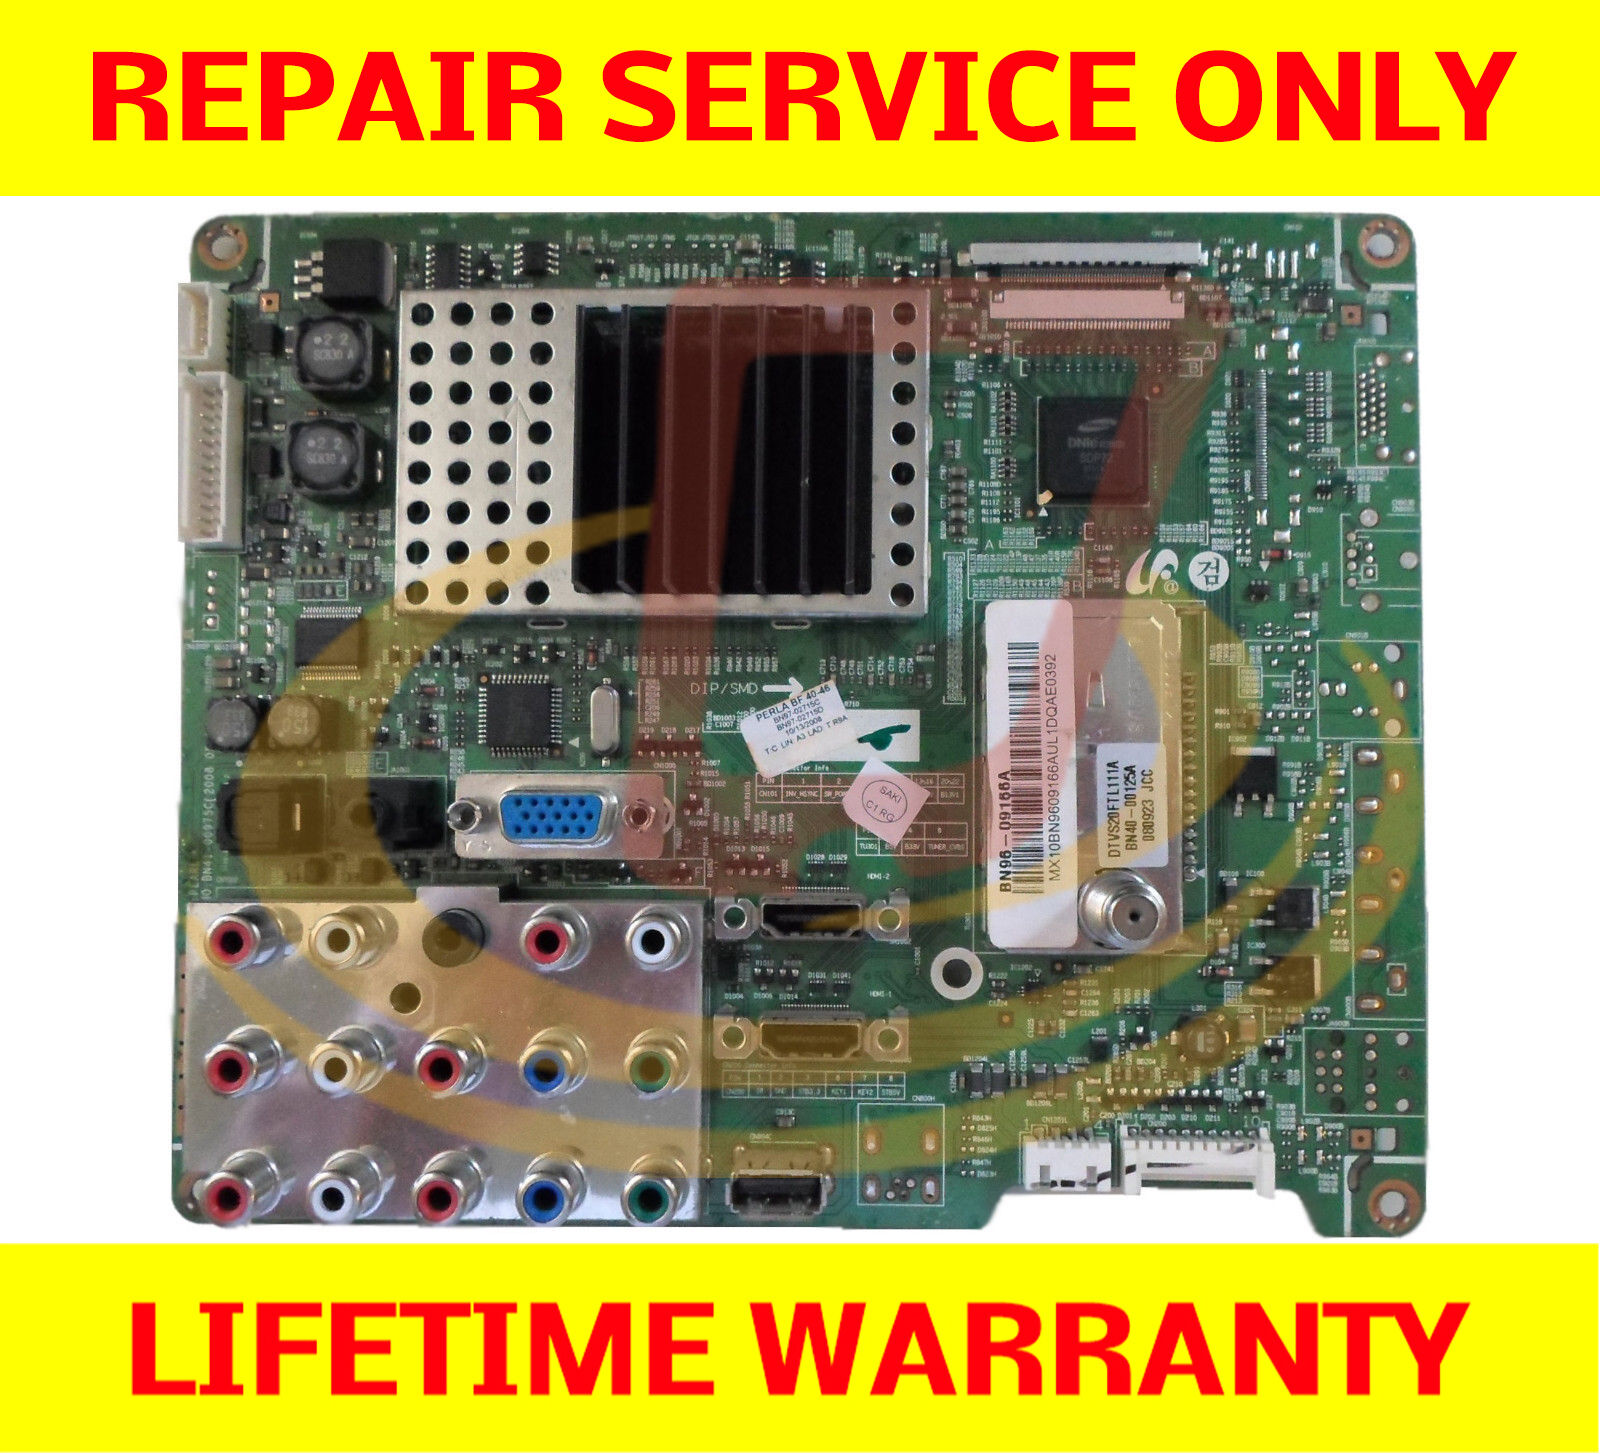 Samsung Main Board REPAIR SERVICE for BN41-00975B BN41-00975C TV Cycling On &OFF